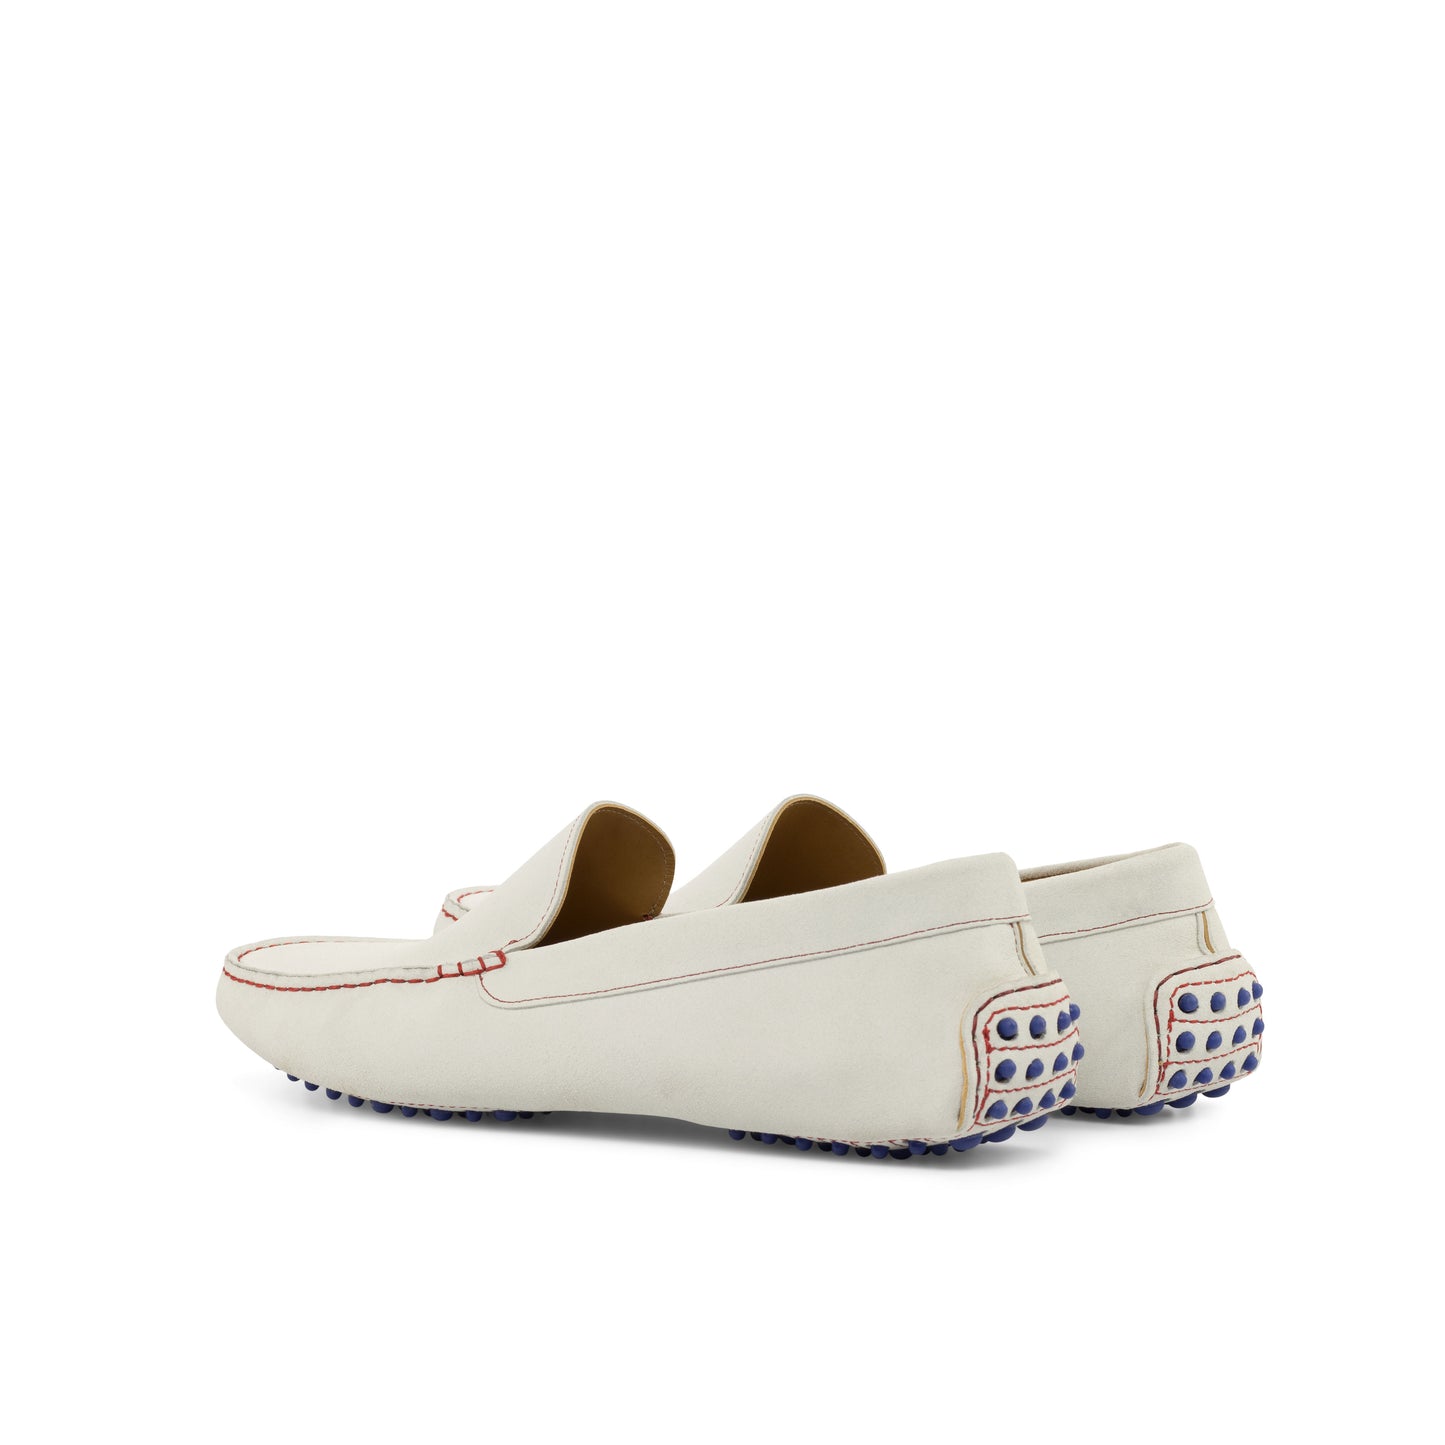 SUITCAFE White Suede Blue Dots Men's Driving Loafers